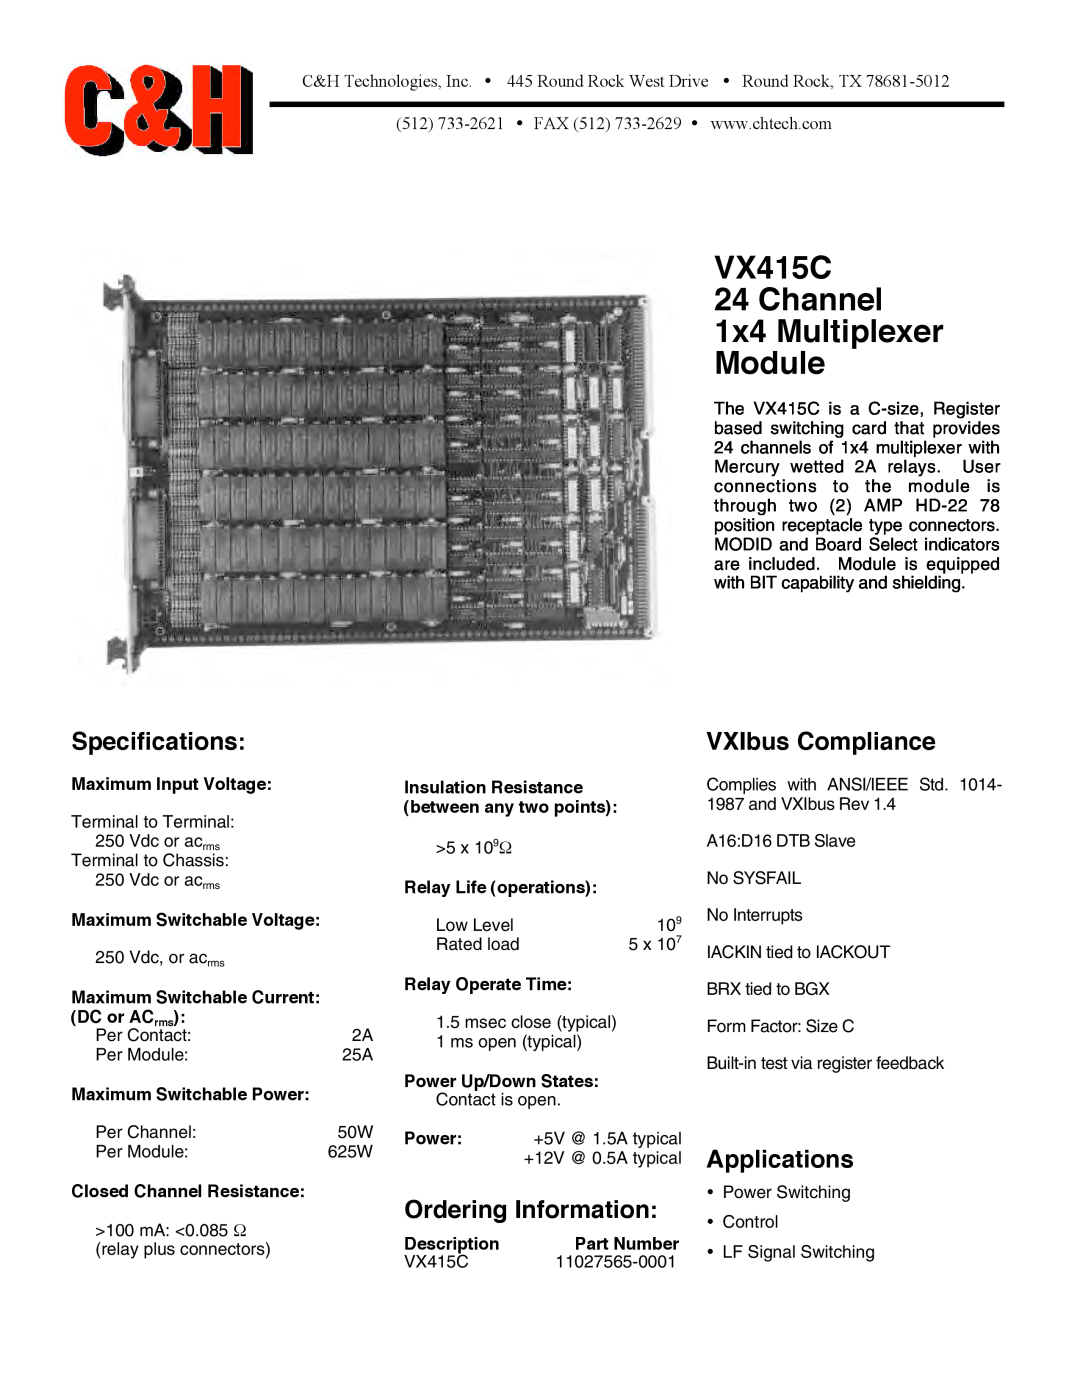 CH Tech specifications VX415C 24 Channel 1x4 Multiplexer Module, Specifications, Ordering Information, Applications 